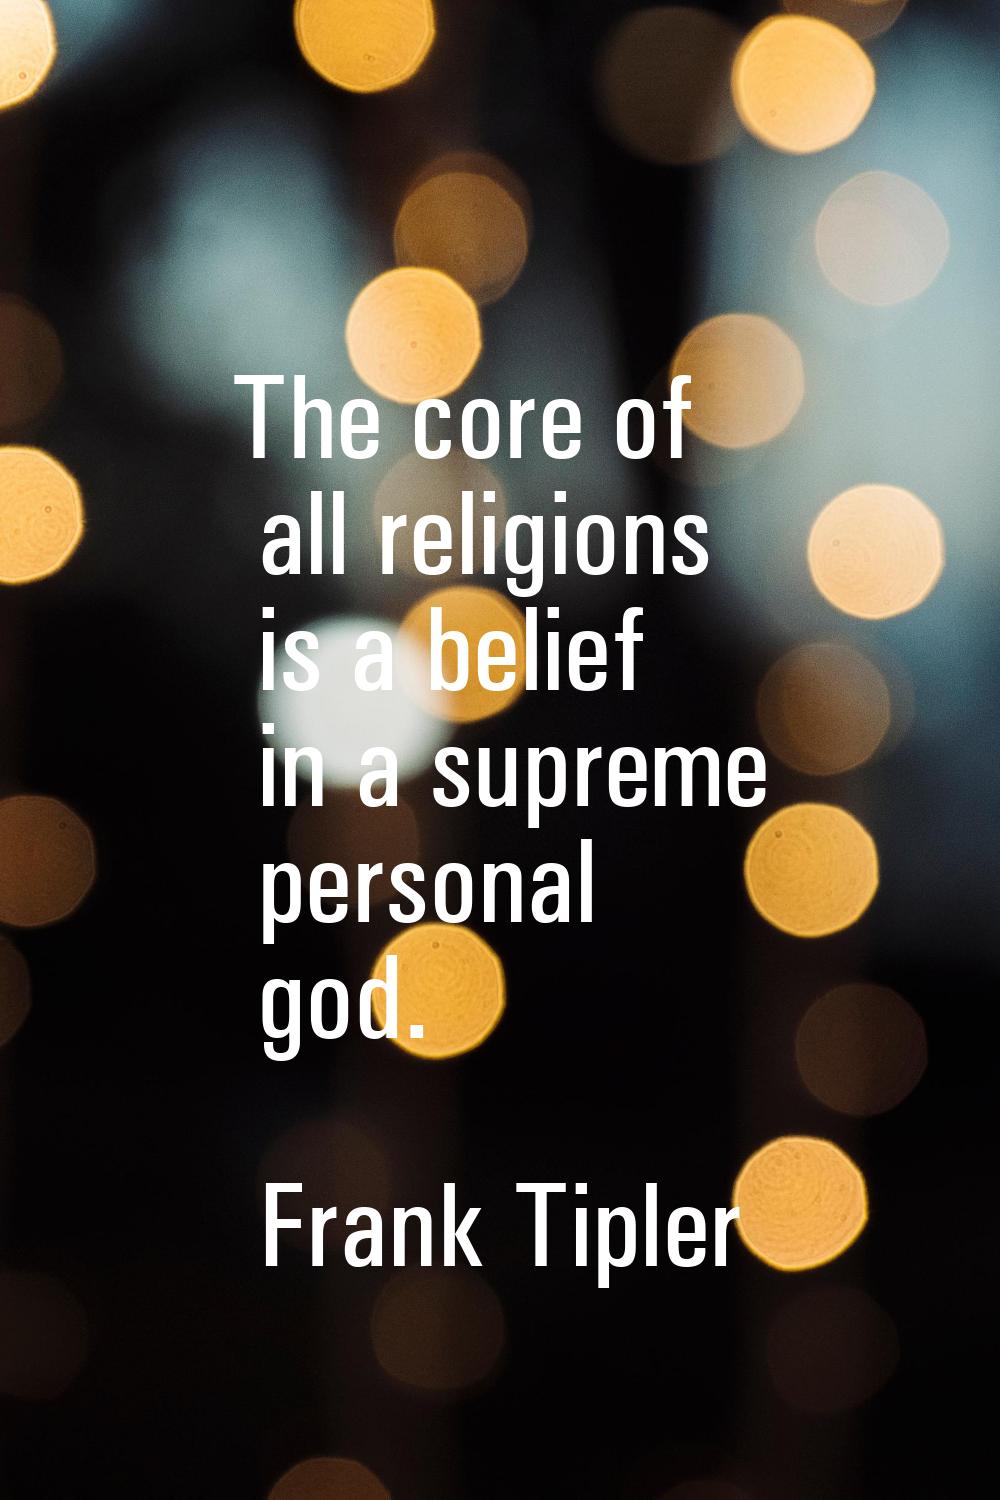 The core of all religions is a belief in a supreme personal god.